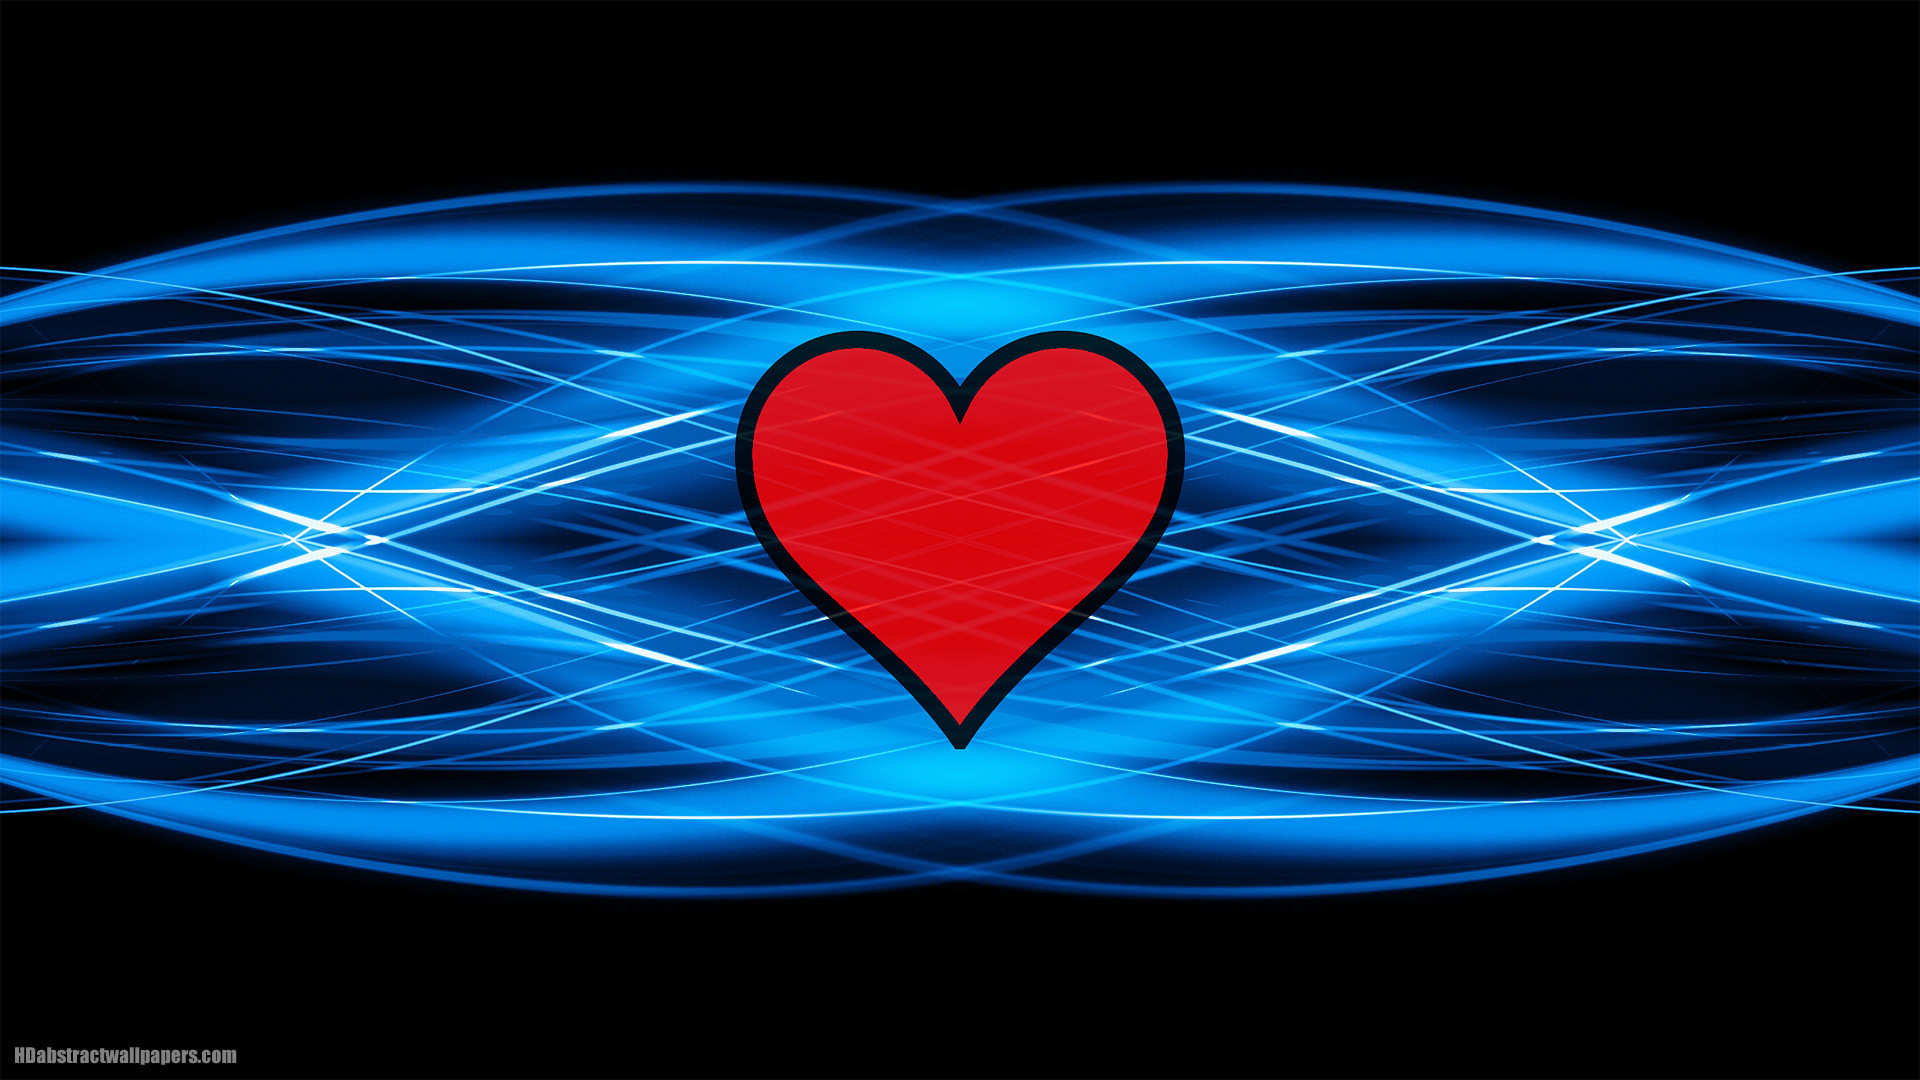 1920x1080 Black blue abstract background with red love heart in the middle, very  clean and modern abstract wallpaper. In HD quality resolution .